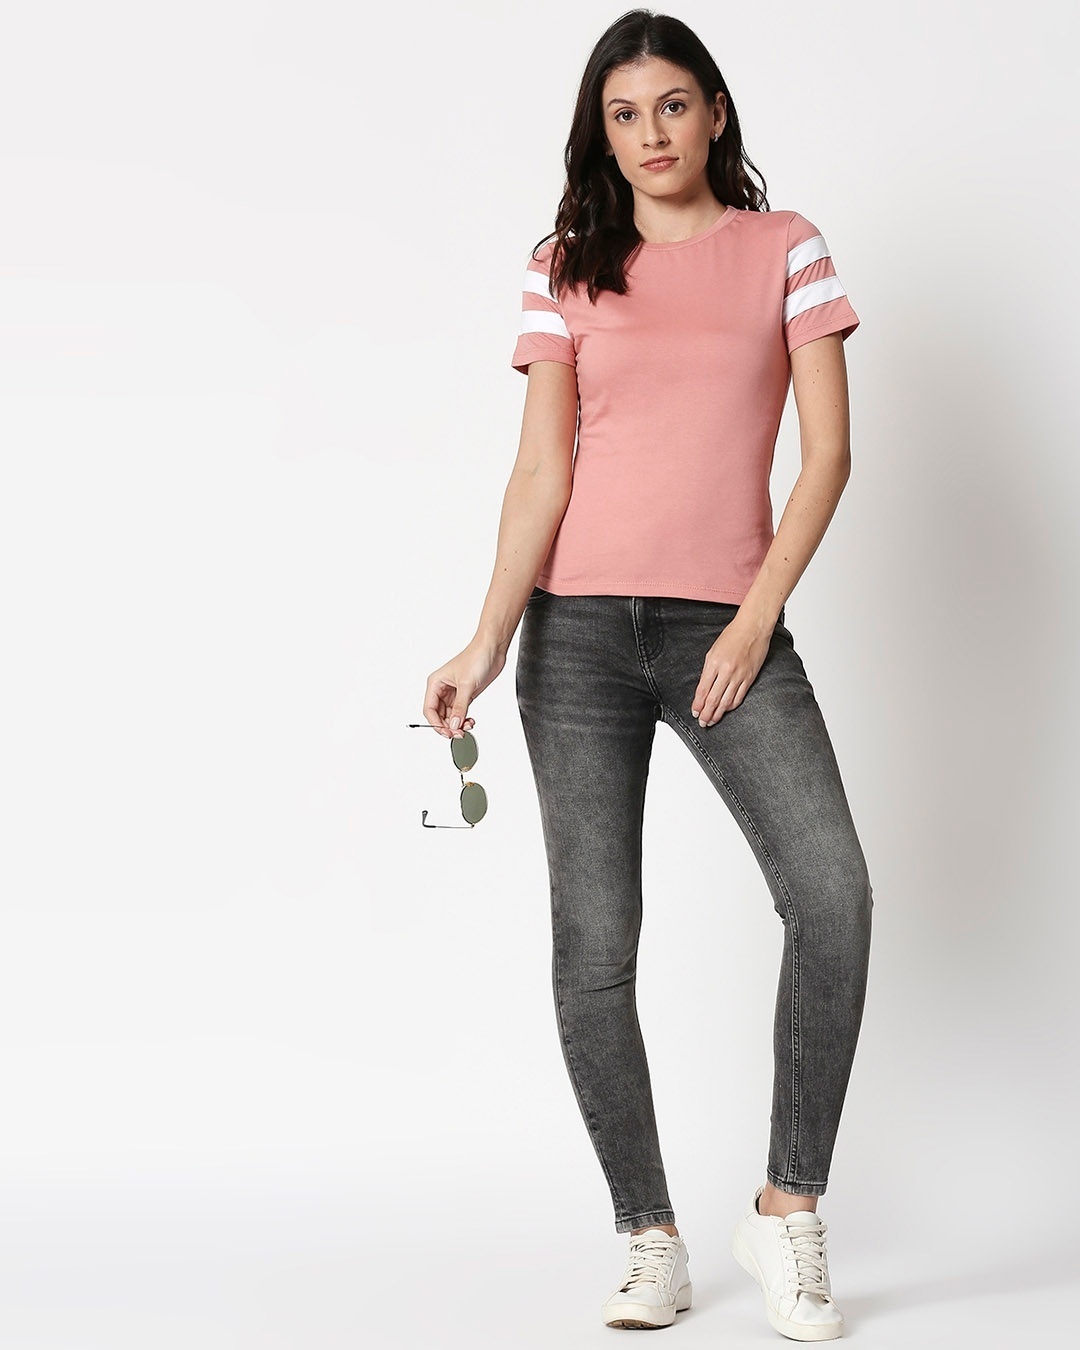 Shop Misty Pink - White Double Tape T-Shirt